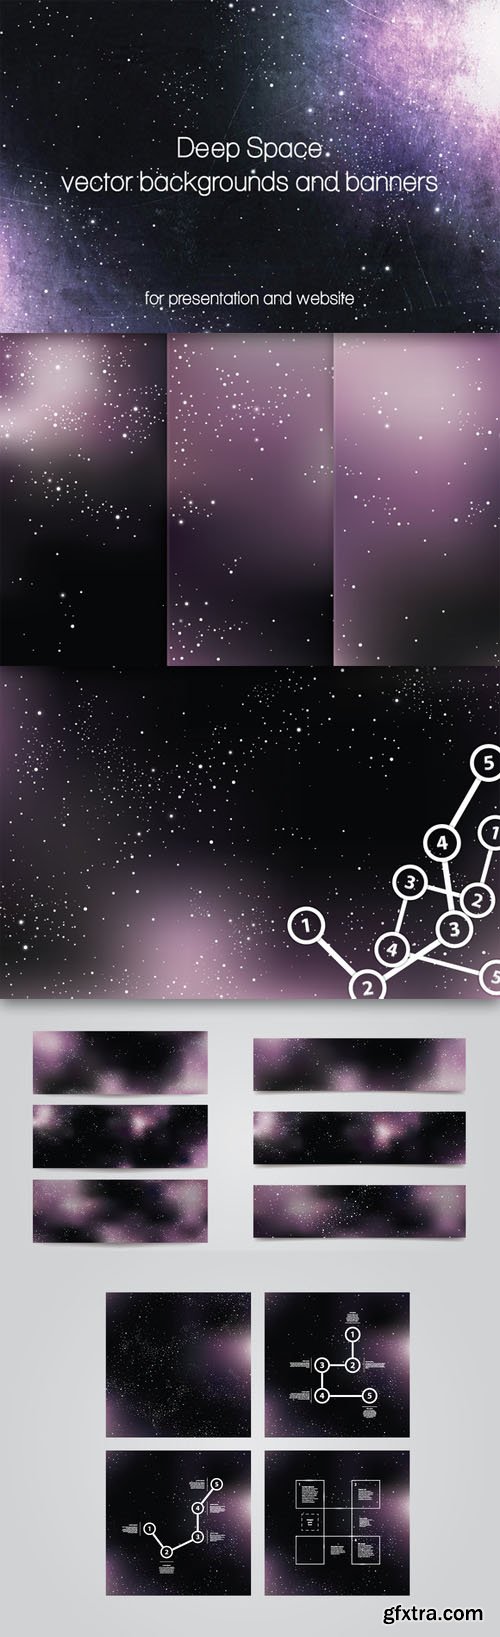 Deep Space backgrounds and banners - CM 7342